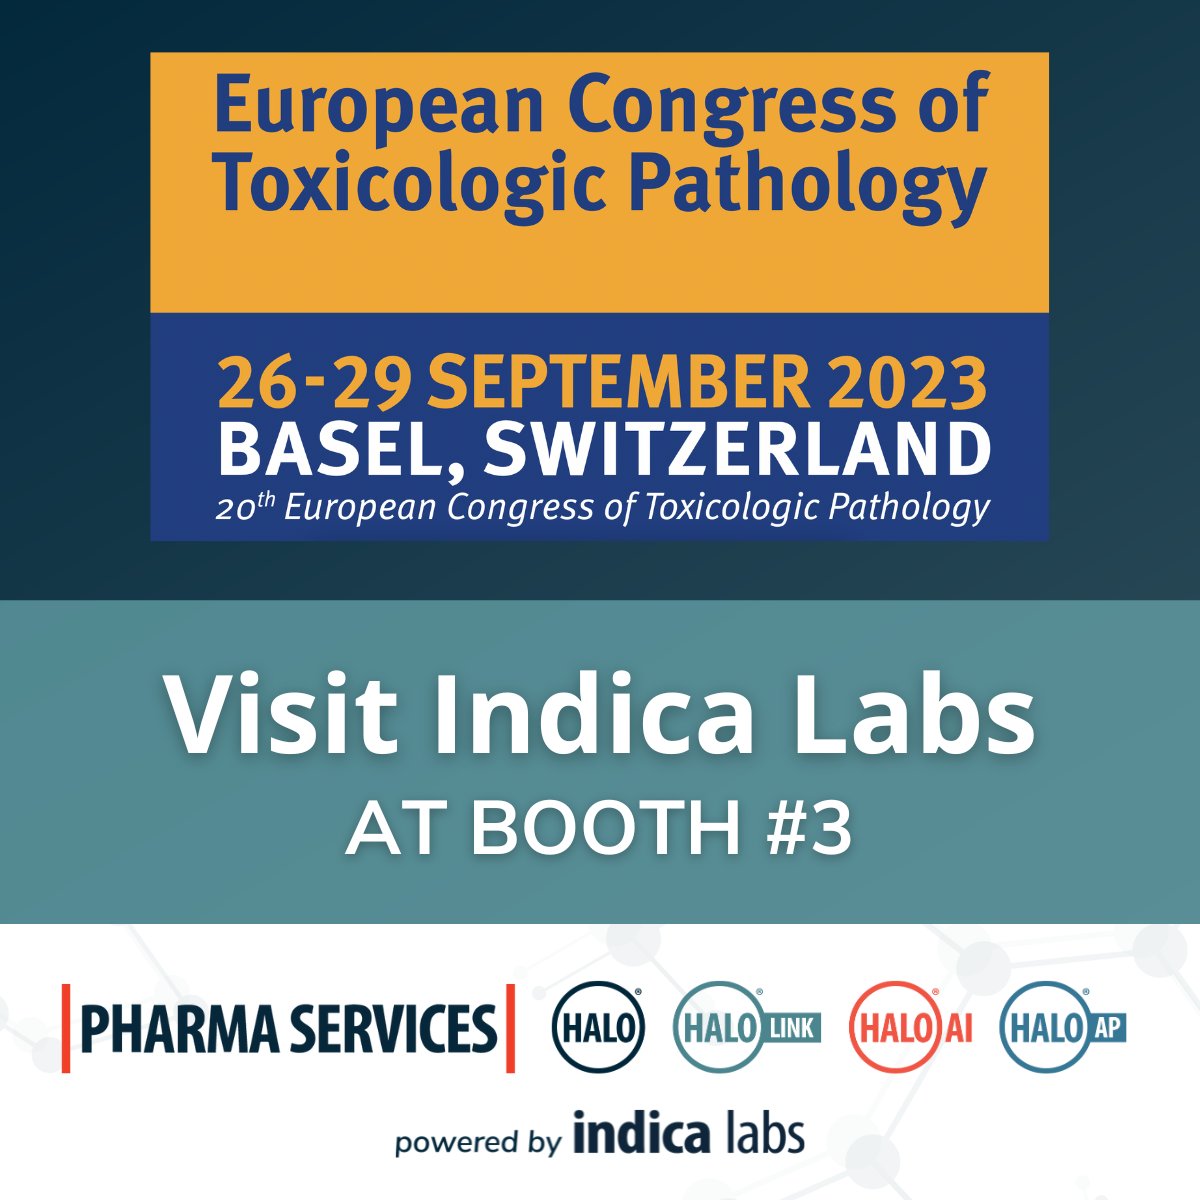 There are a lot of exciting changes and challenges in #toxpath, so visit #IndicaLabs' booth at the European Congress of Toxicologic Pathology to learn about the newest features in #HALOimageanalysis and how they can empower your #digitalpathology workflows!